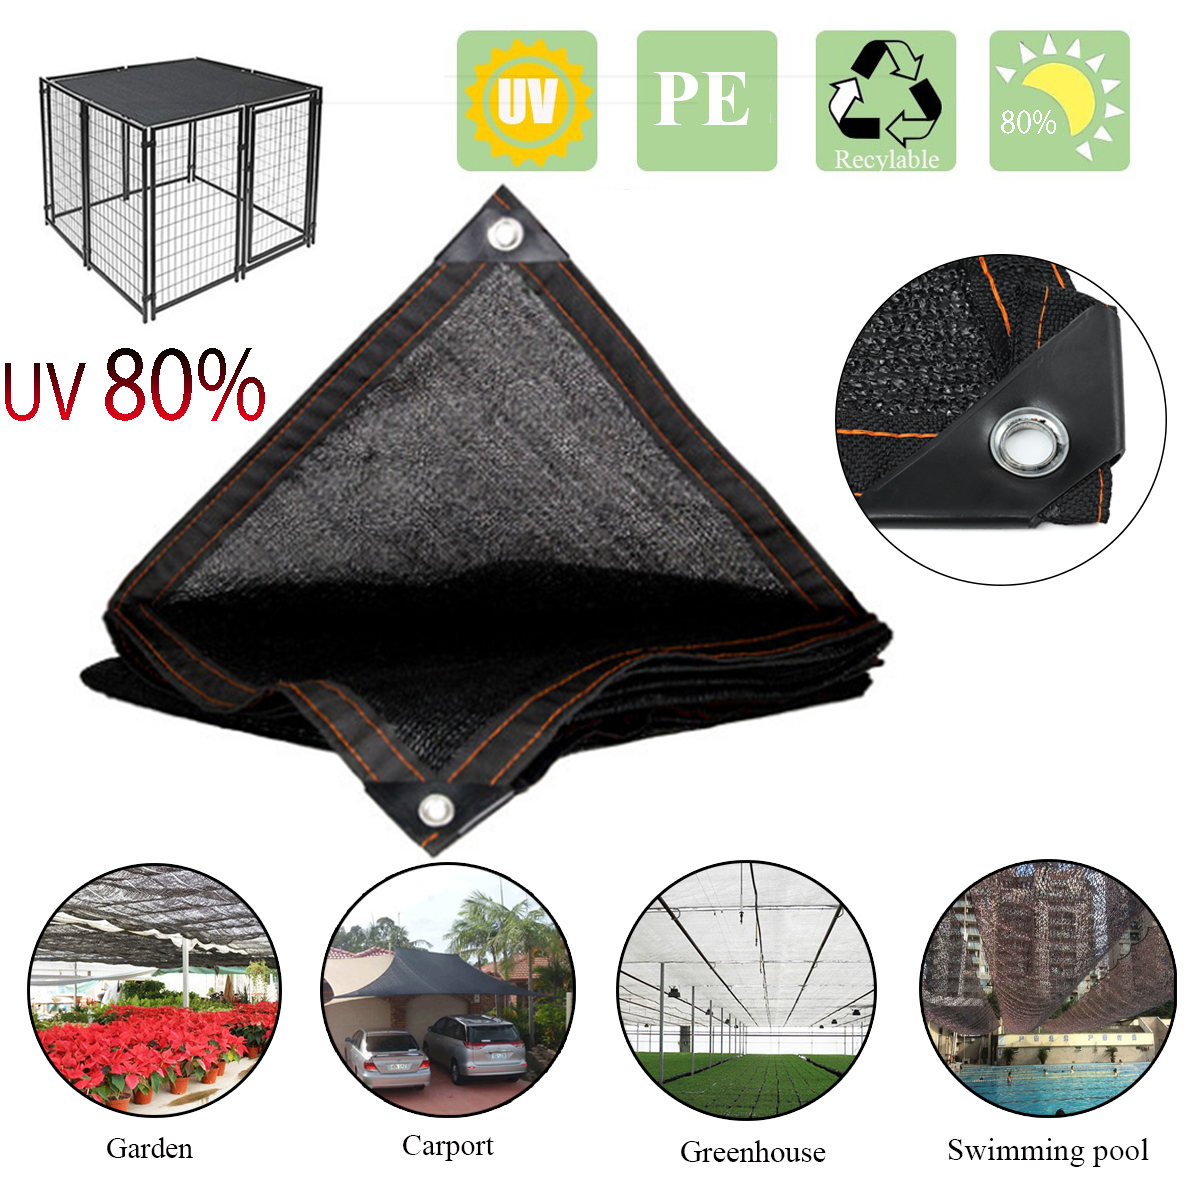 Sunshade-Net-Dog-Kennel-Puppy-Cat-Rabbit-Pet-Shade-Crate-Cover-Cage-Home-80-Sunblock-Shade-1614652-2